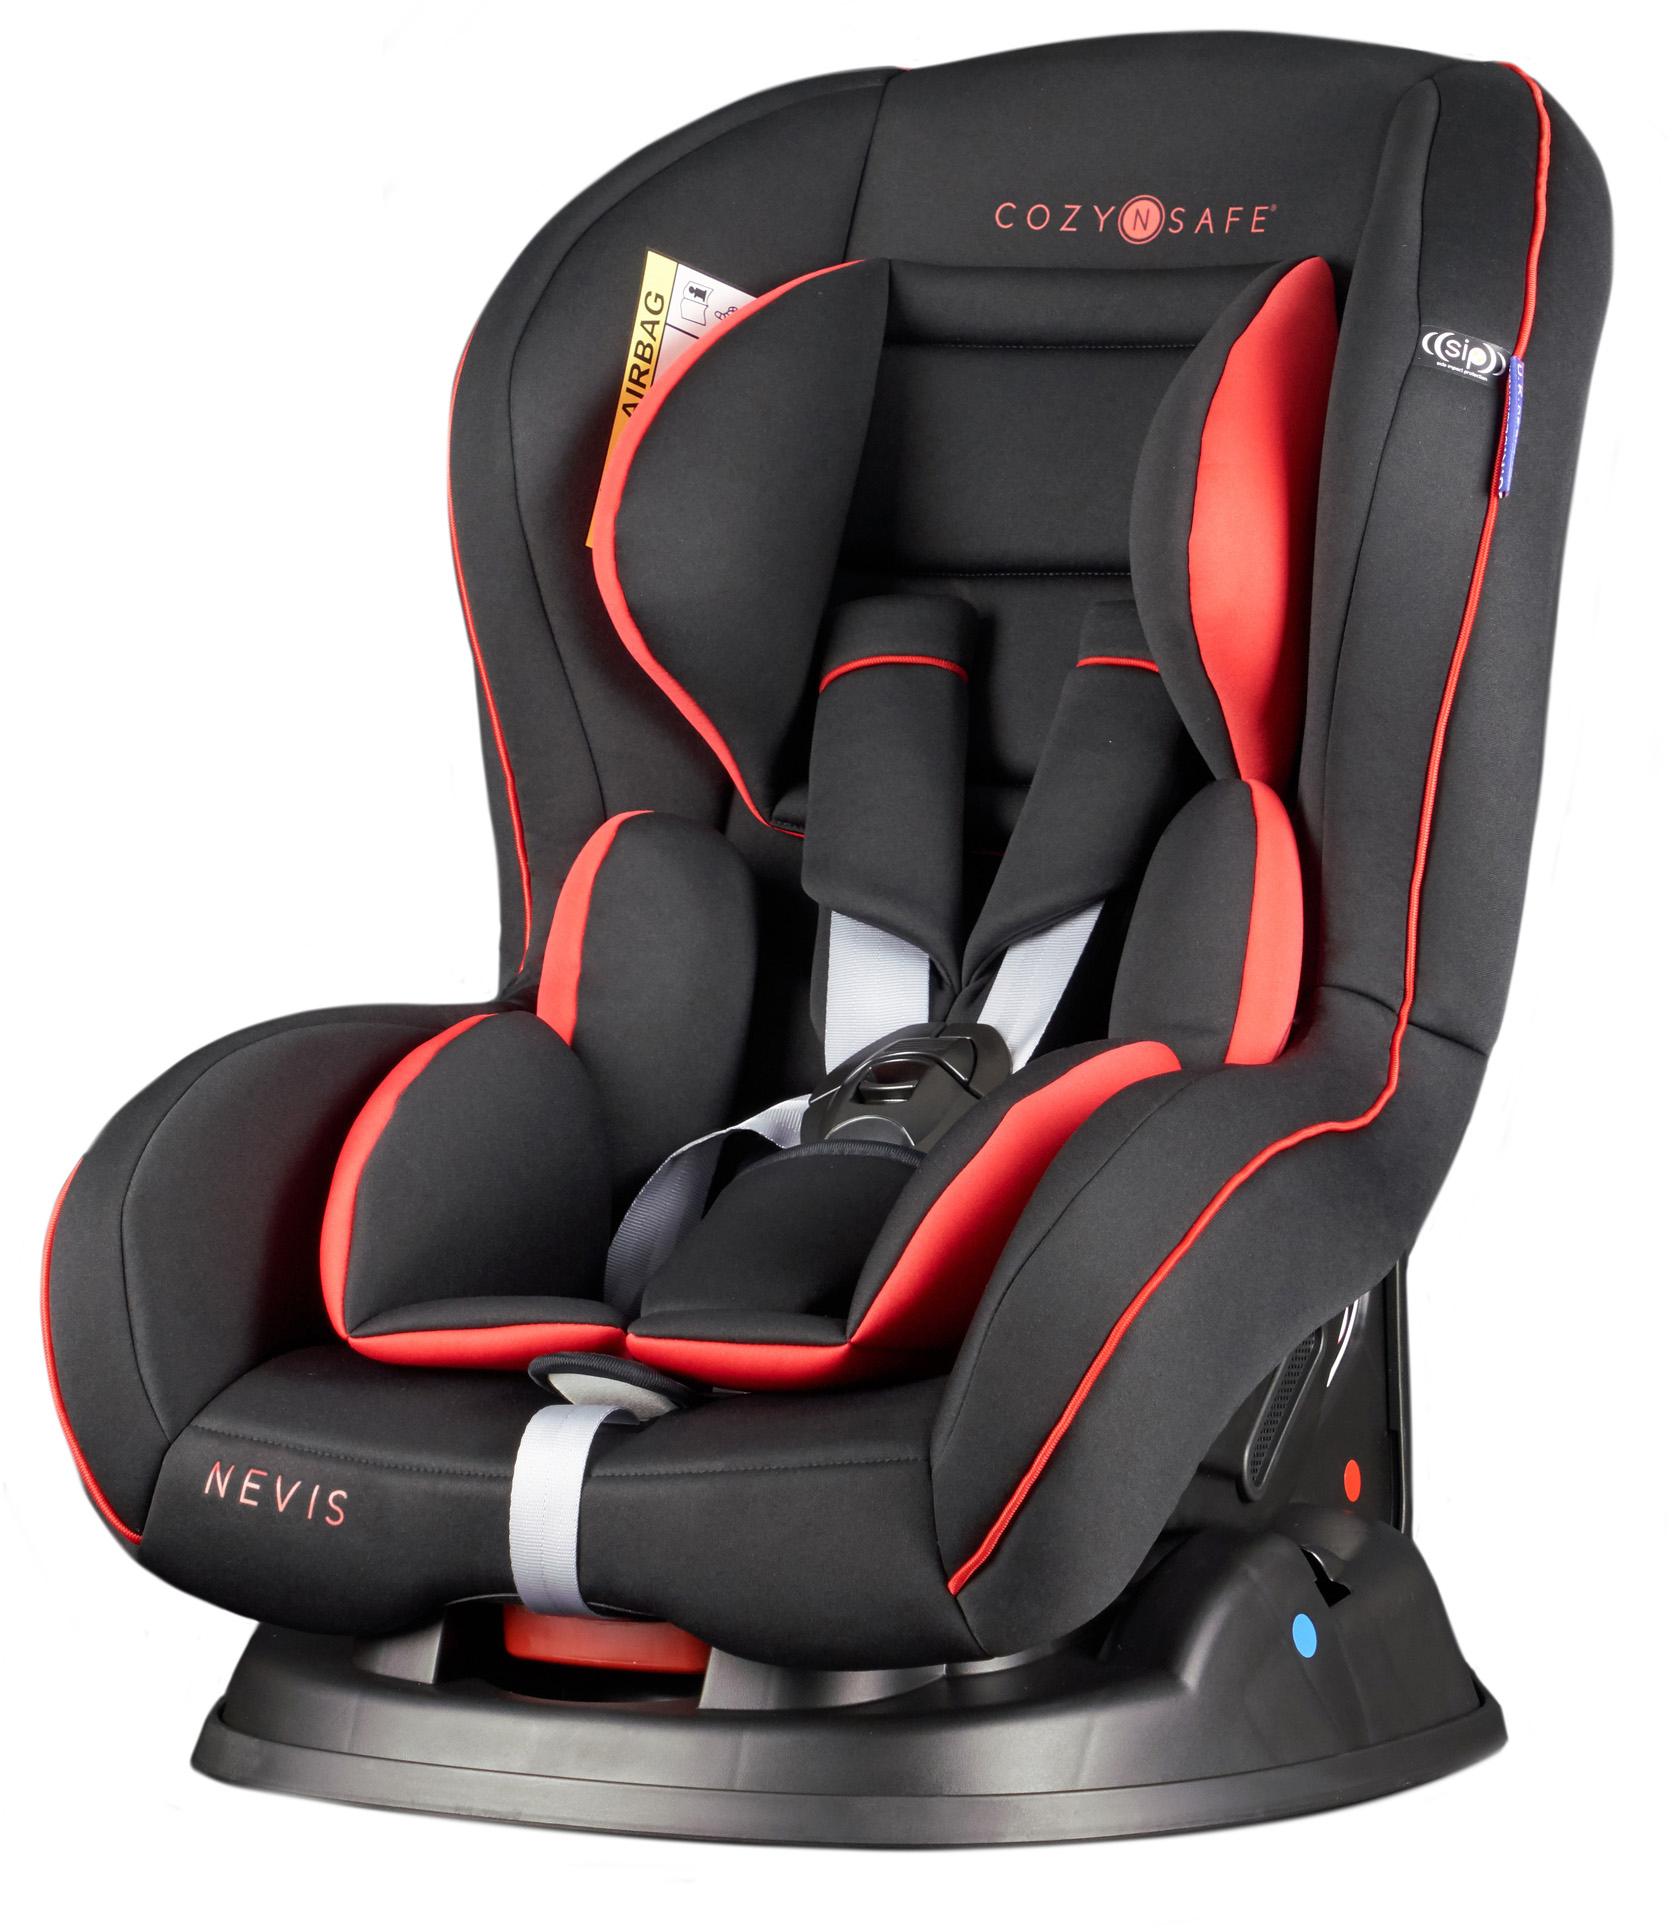 Cozy N Safe Nevis Group 0+/1 Baby Car Seat - Black/Red